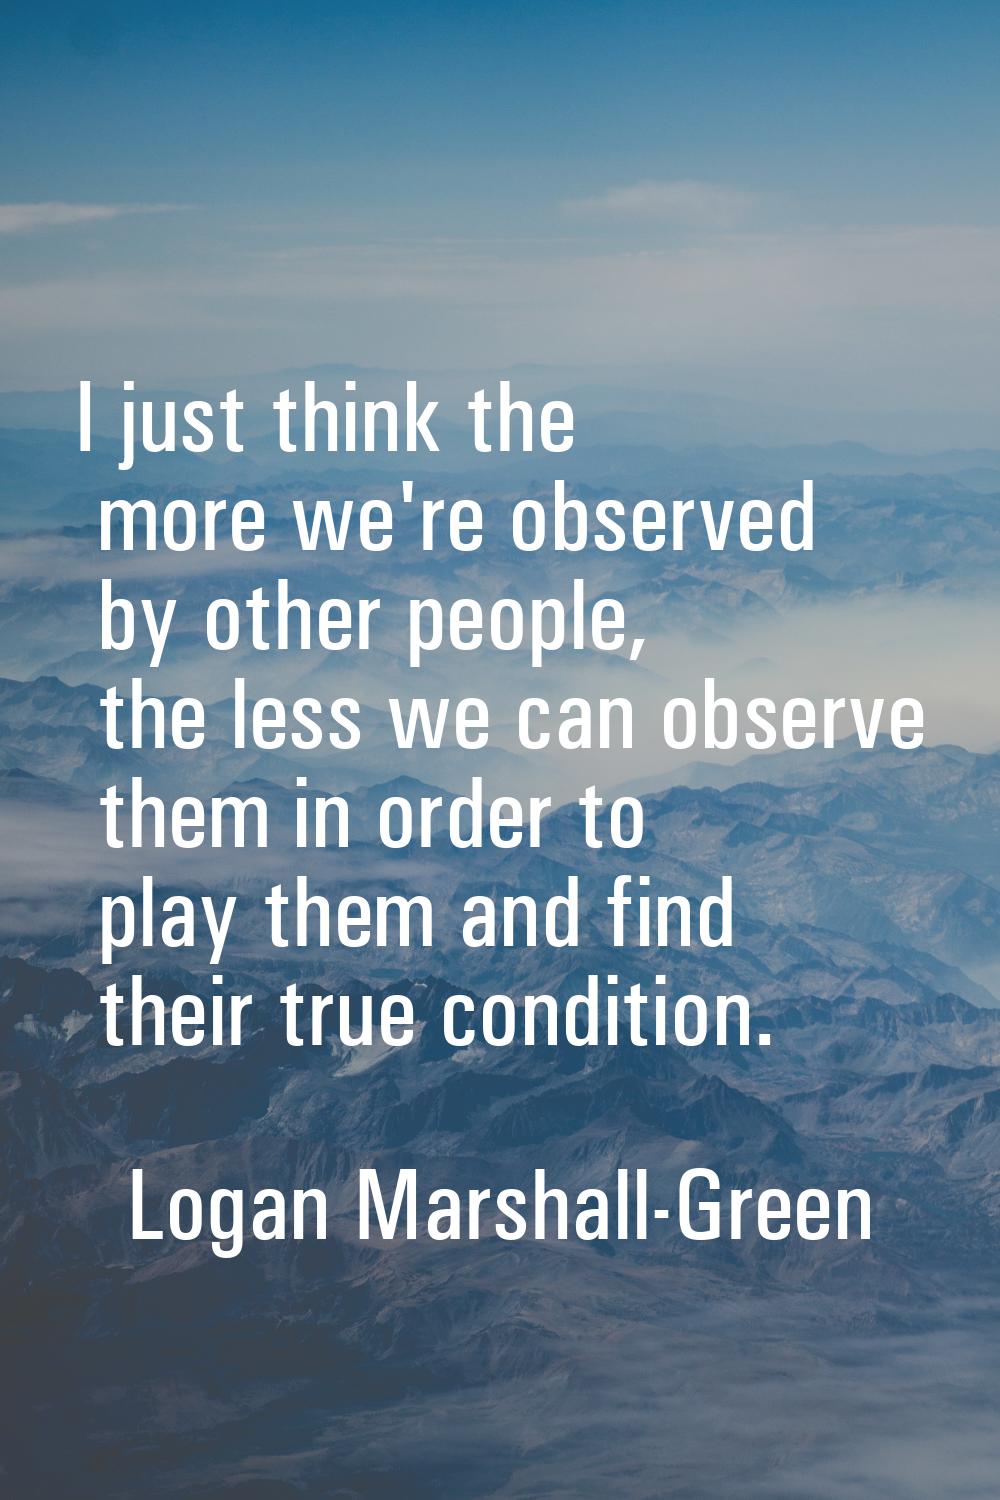 I just think the more we're observed by other people, the less we can observe them in order to play